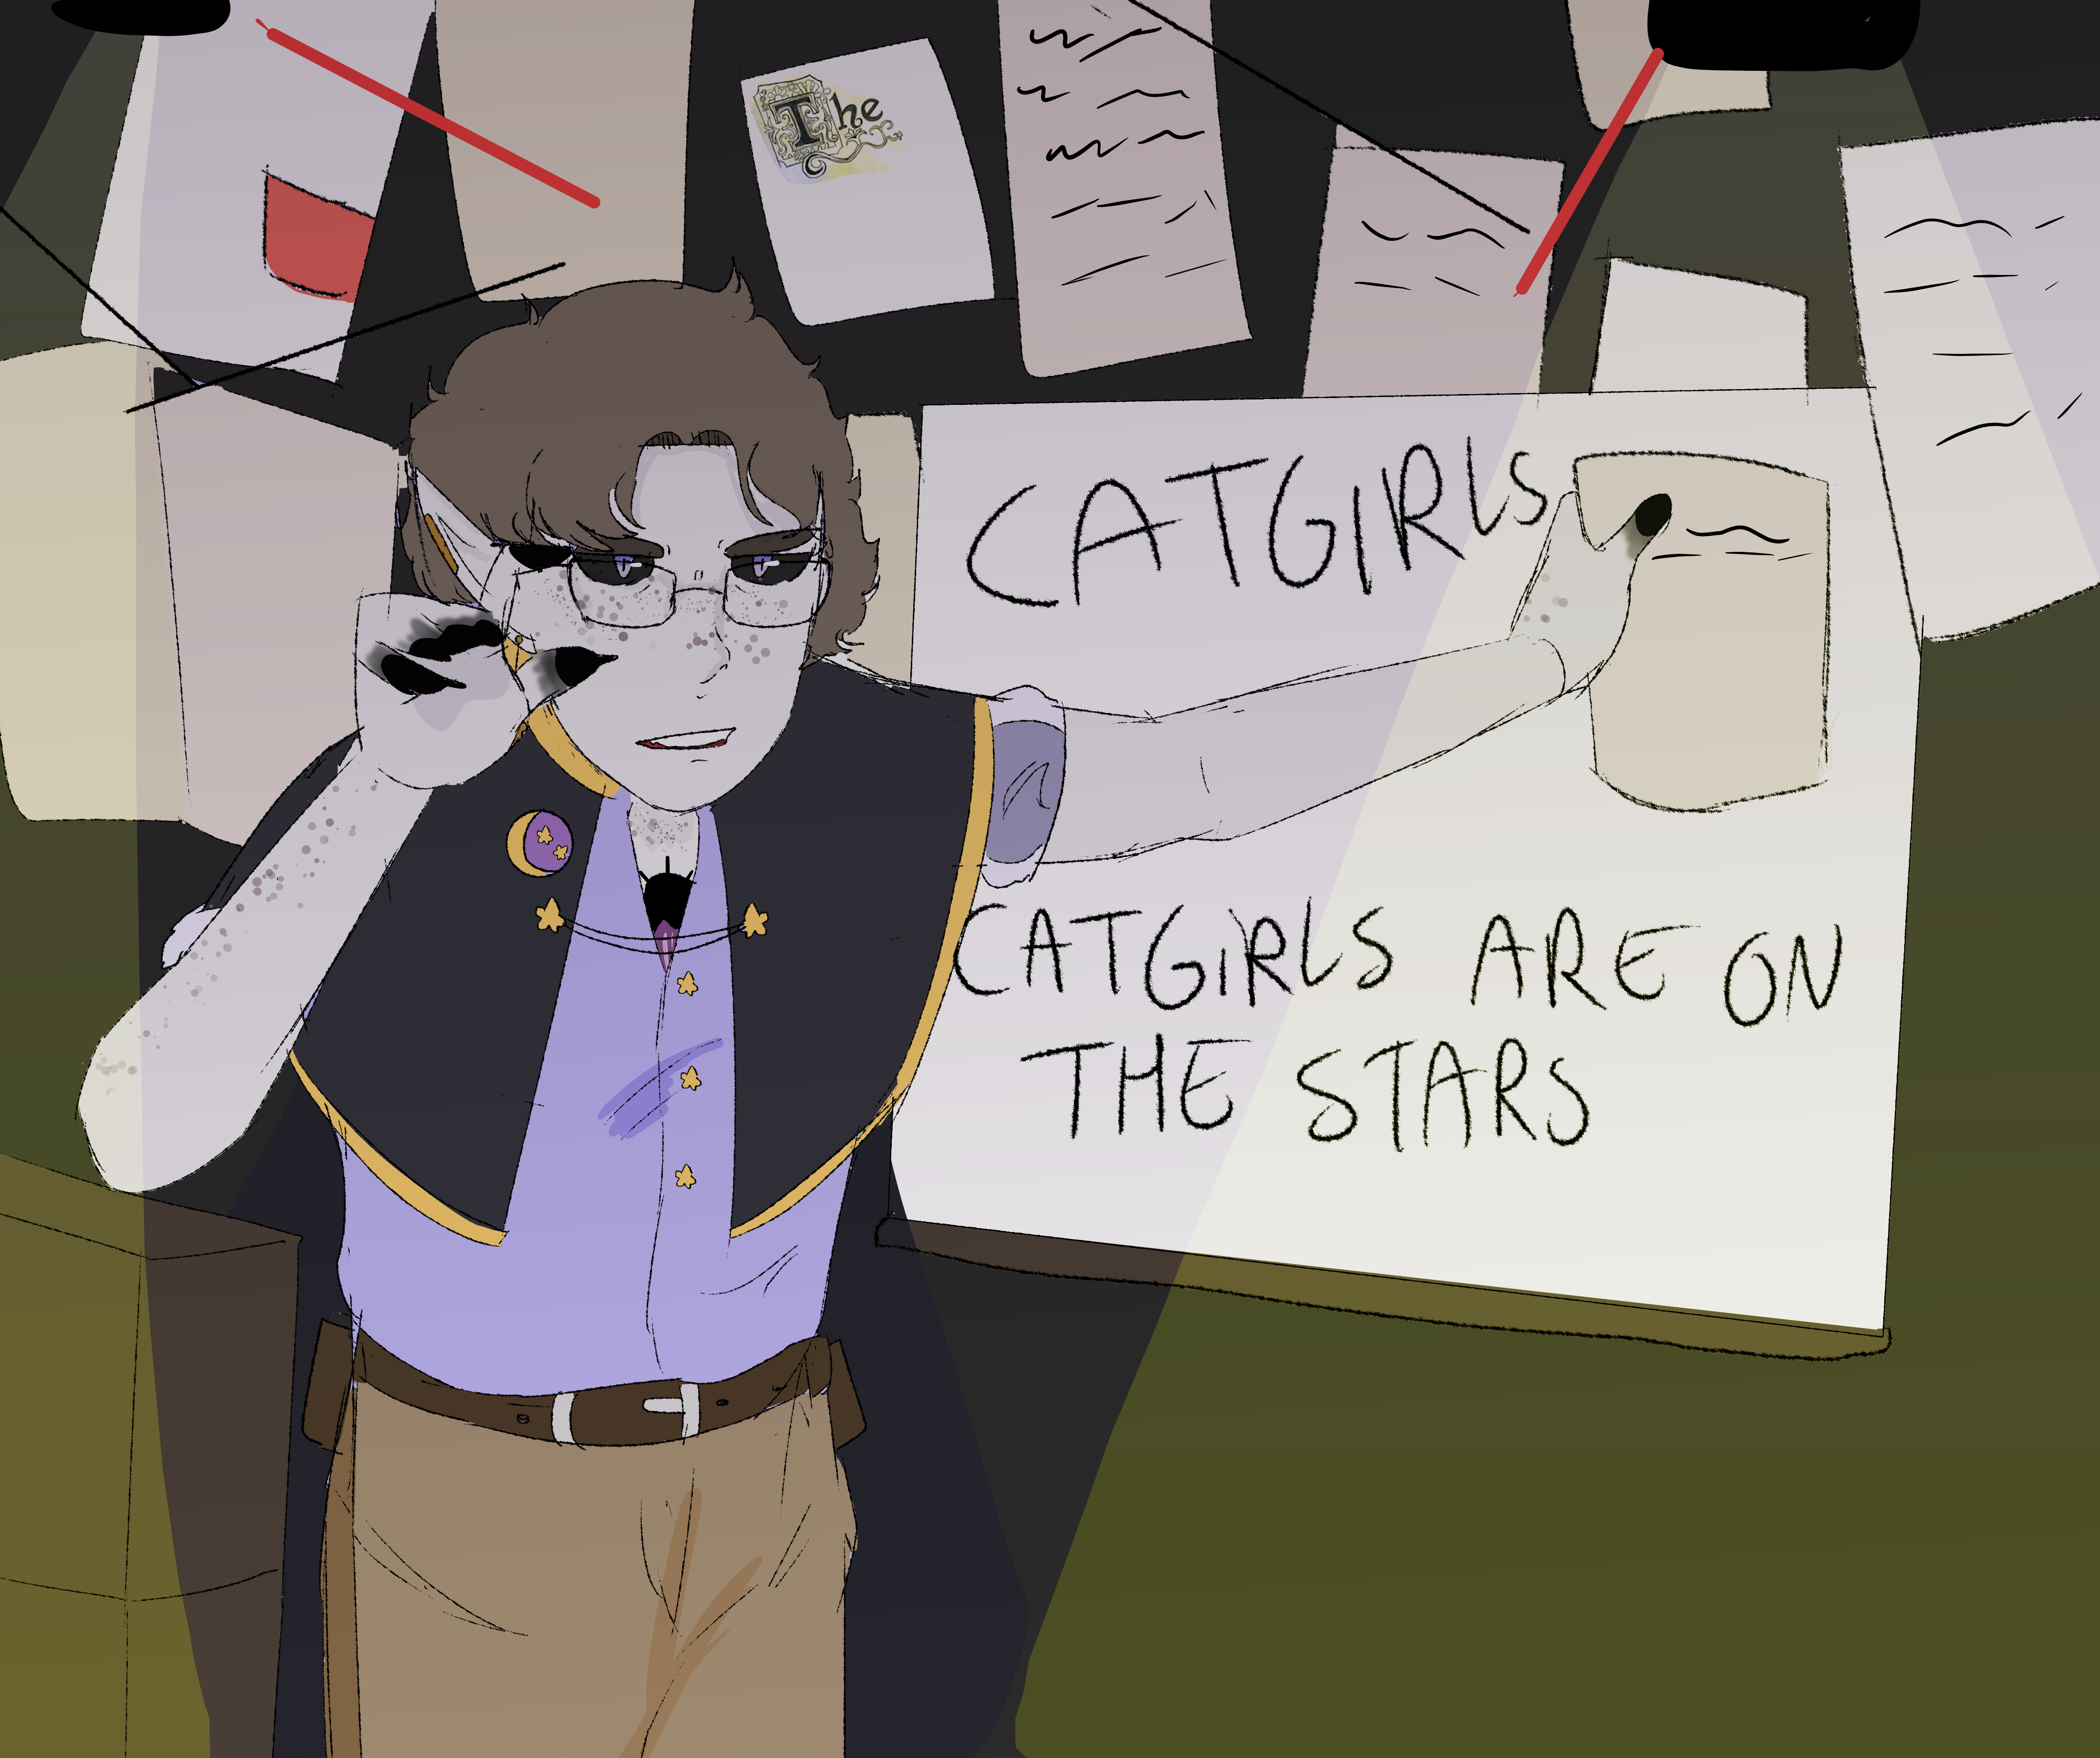 A professor, with gray hair, glasses, a purple button up shirt with yellow stars, a gray vest with the same stars, a brown belt, and tan pants has one hand on a wall, the other lifted up. The wall is covered in papers, one saying 'Catgirls Catgirls are on the stars.' His nails are painted black.